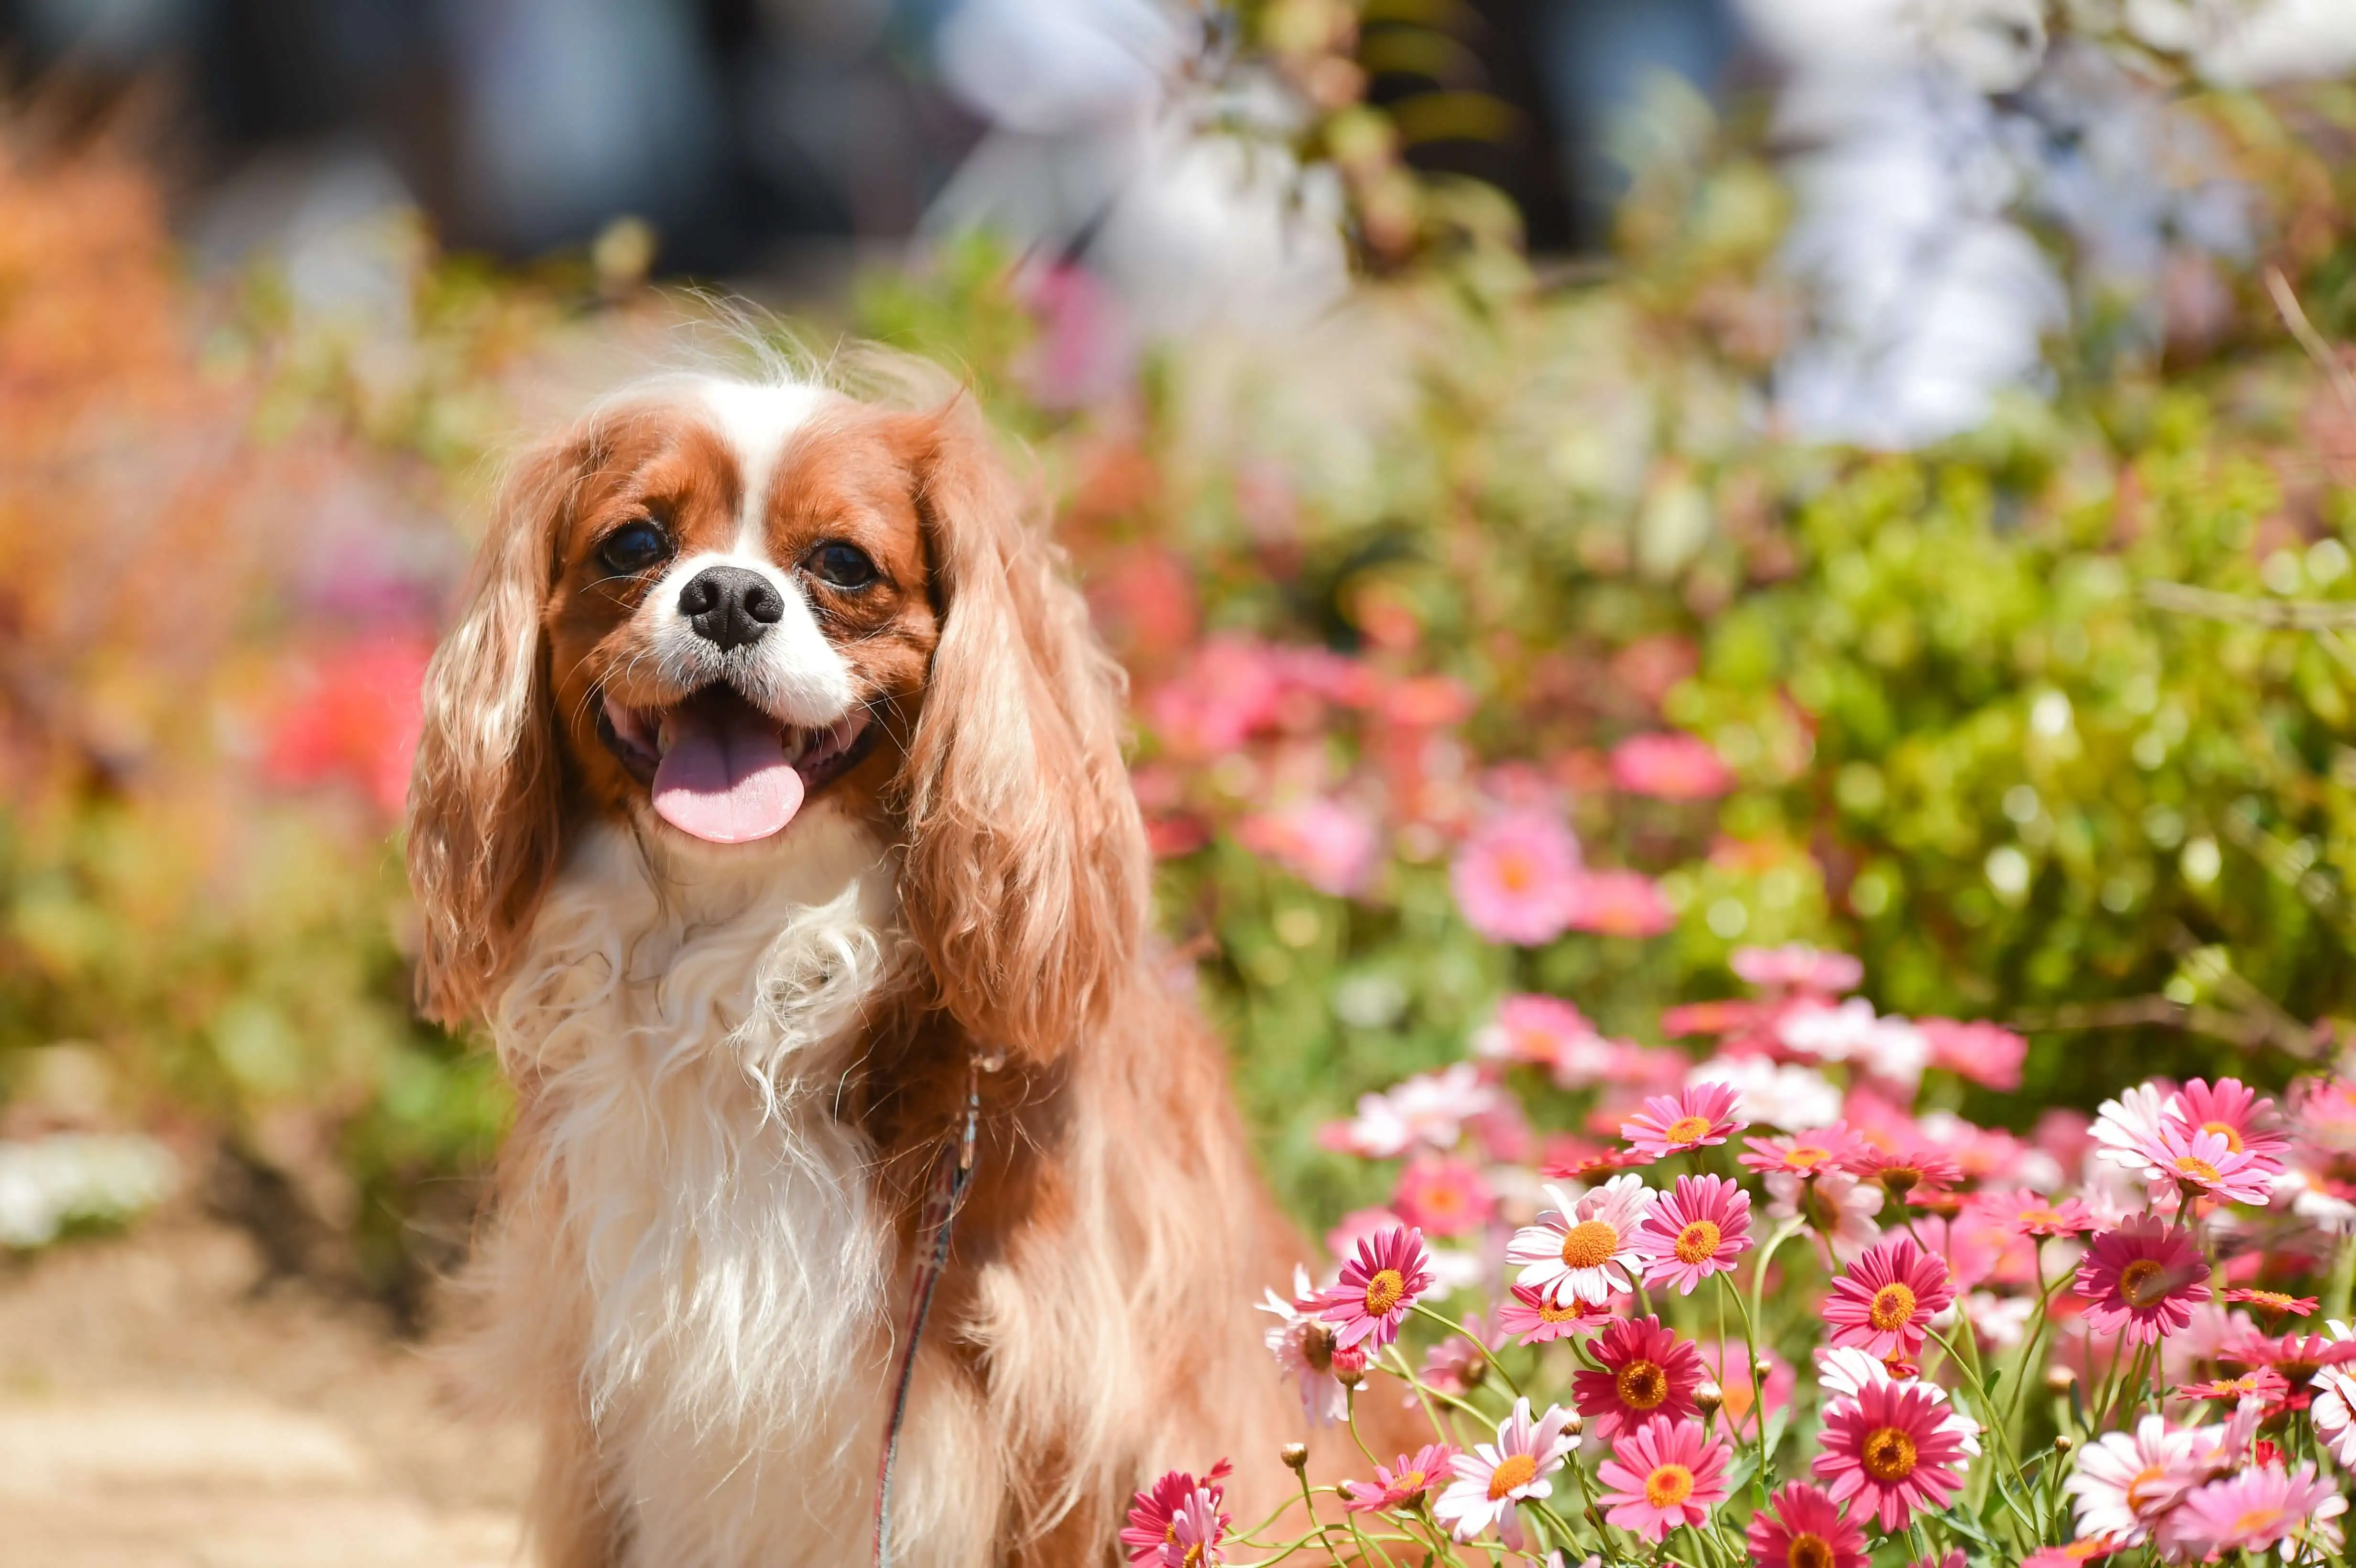 King Charles Spaniel dog sitting in front of pink flowers